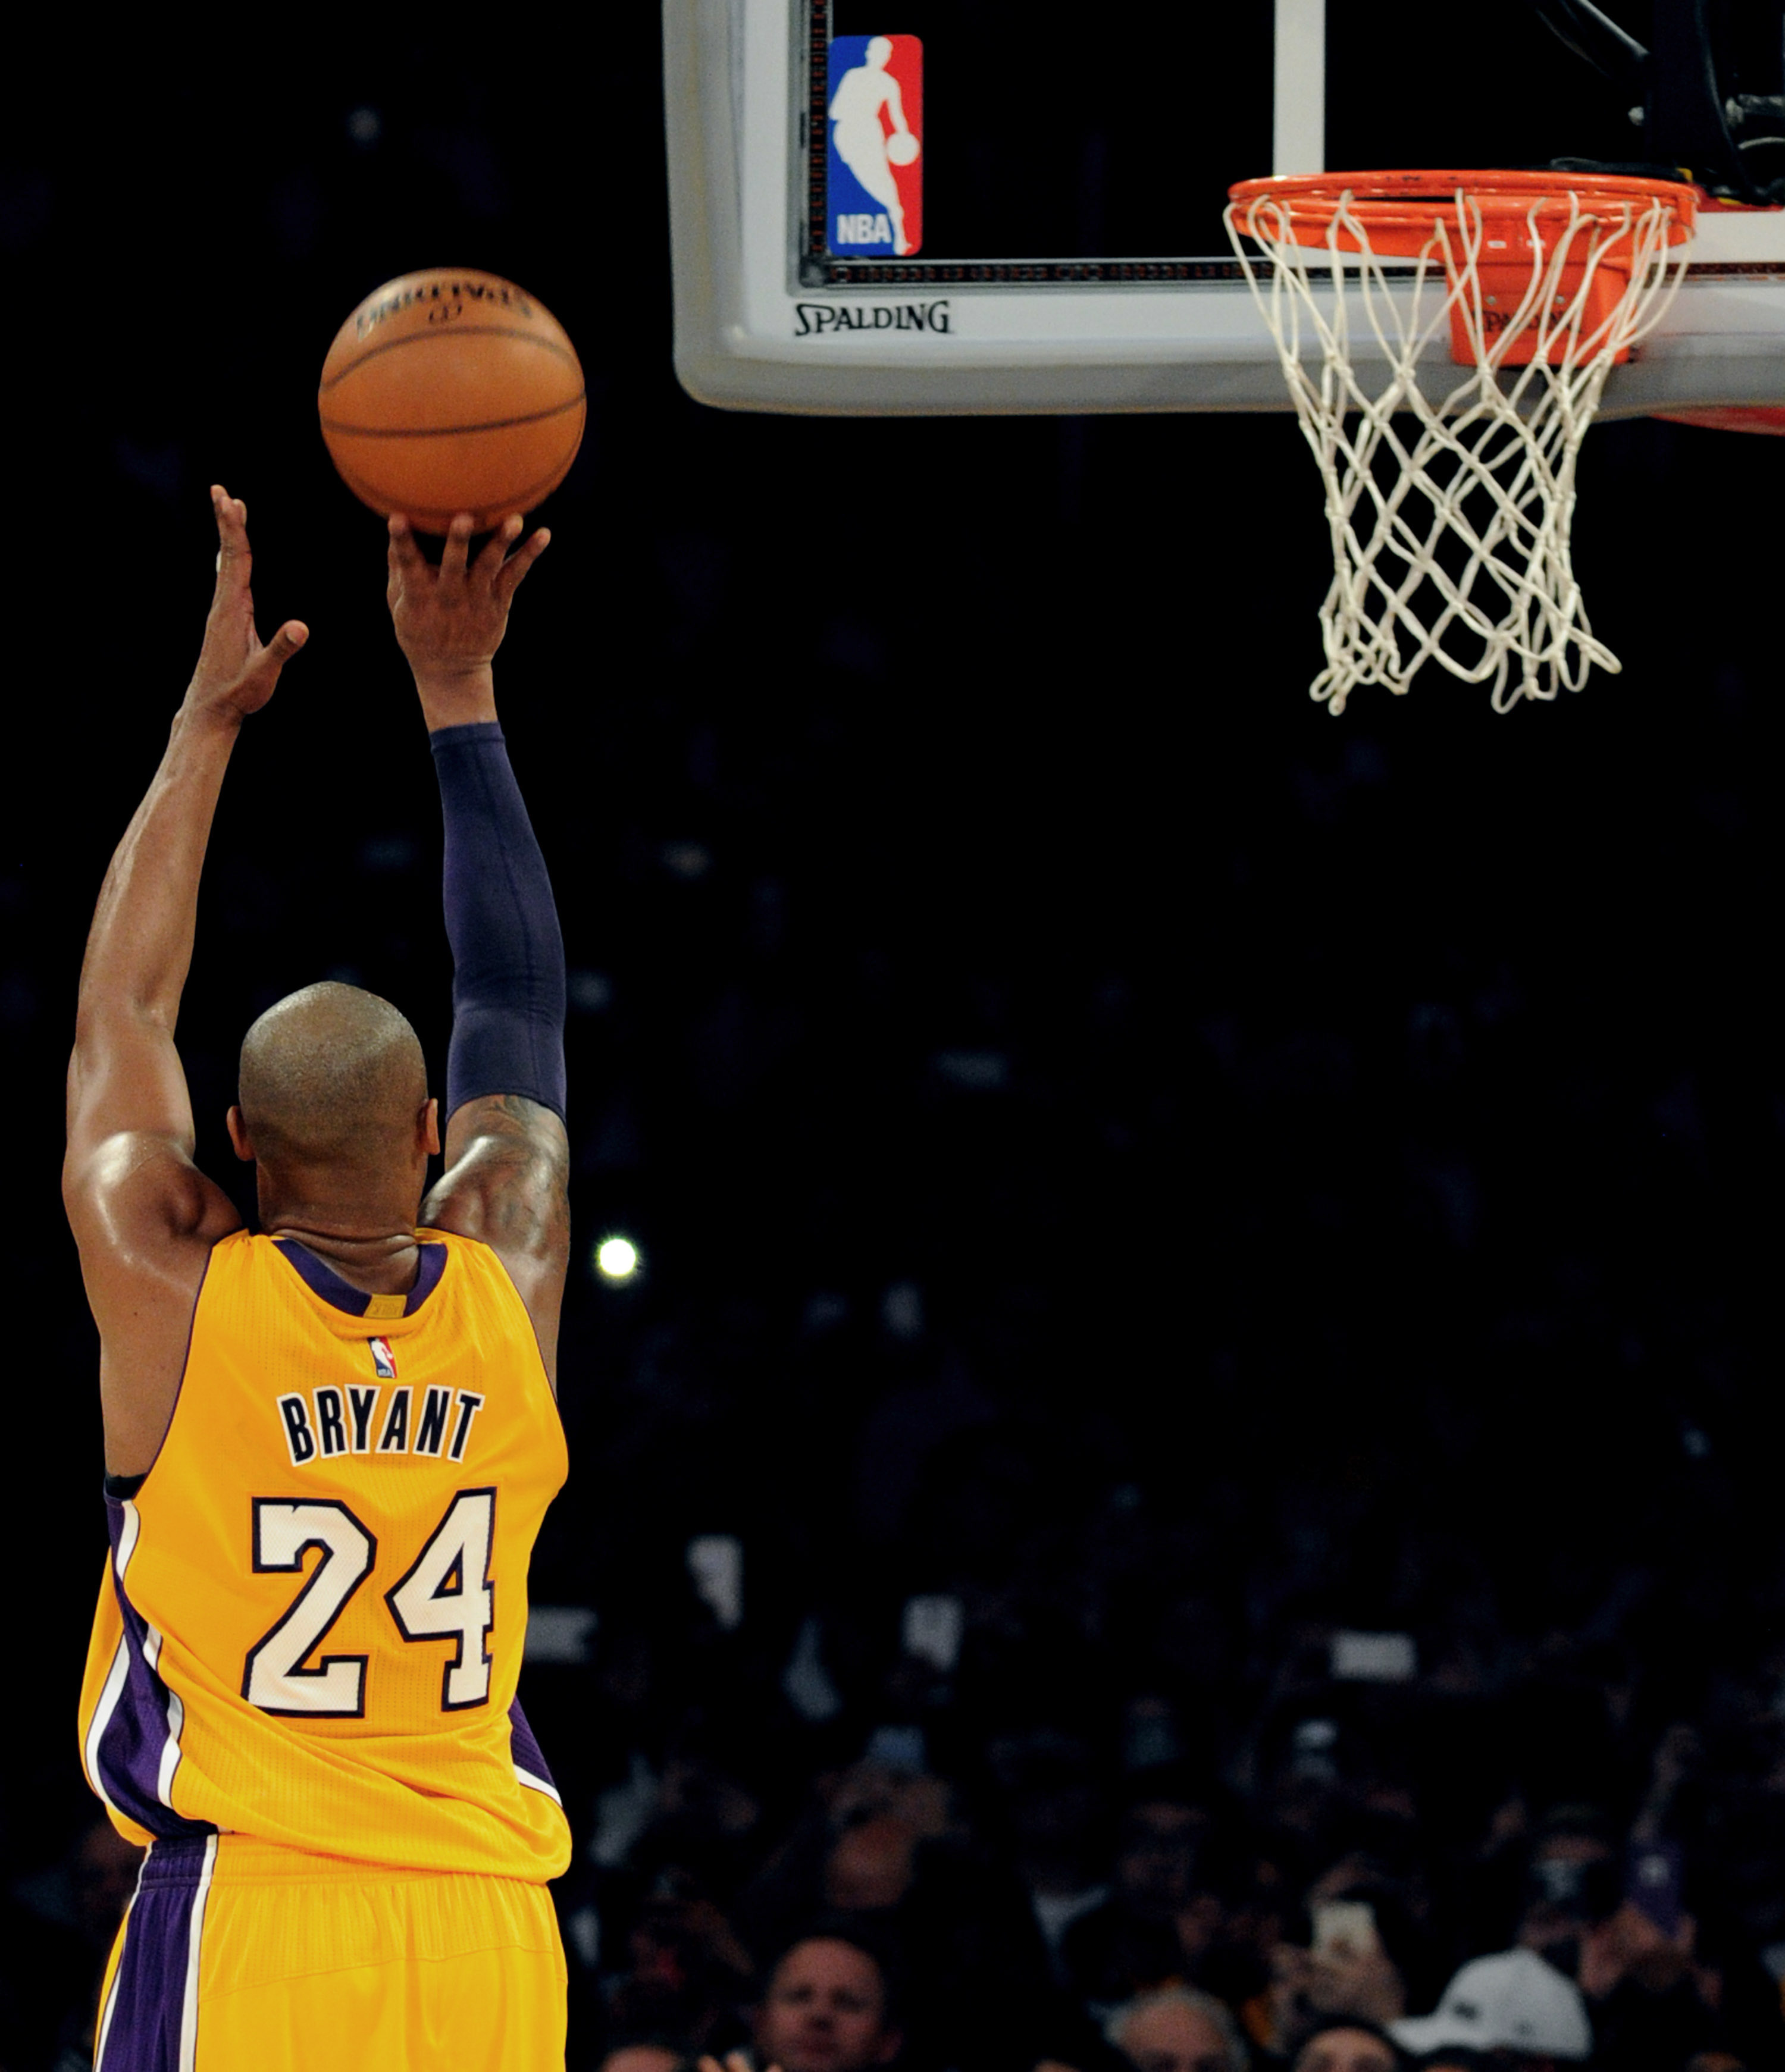 Los Angeles Lakers forward Kobe Bryant (24) shoots a free throw to